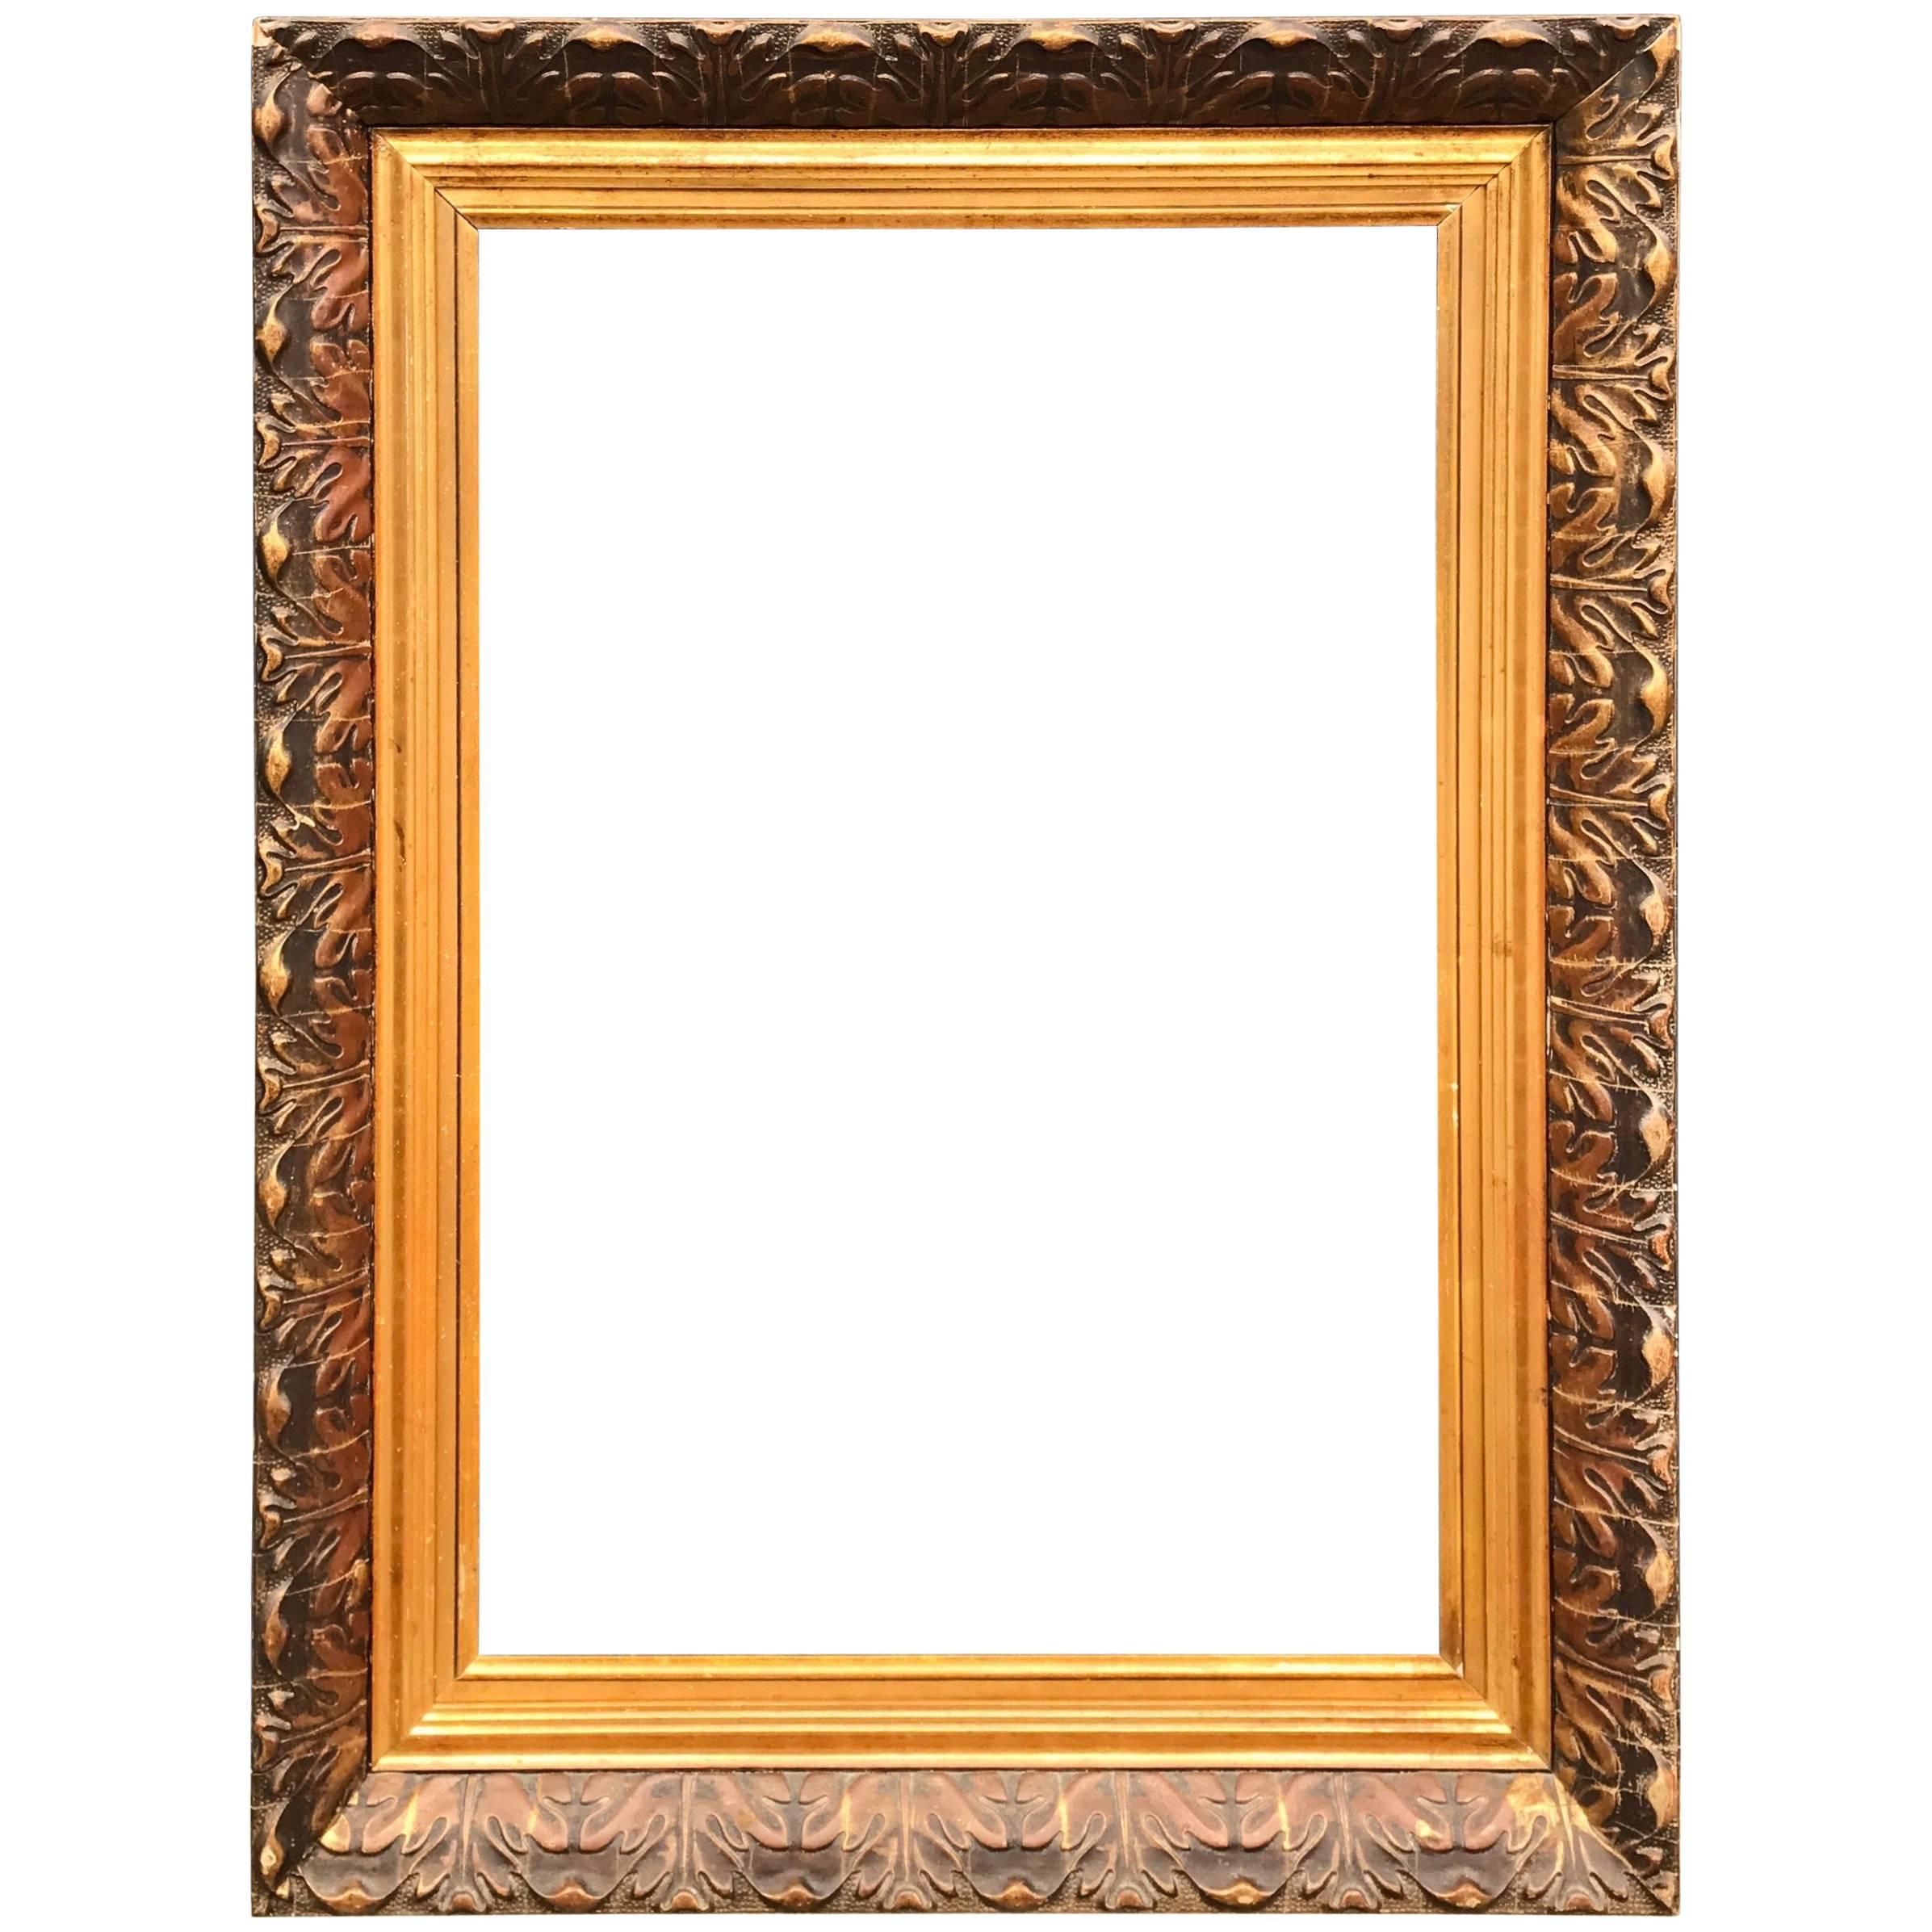 Large and Decorative Gilded Antique Painting or Mirror Frame with Leaf Motifs